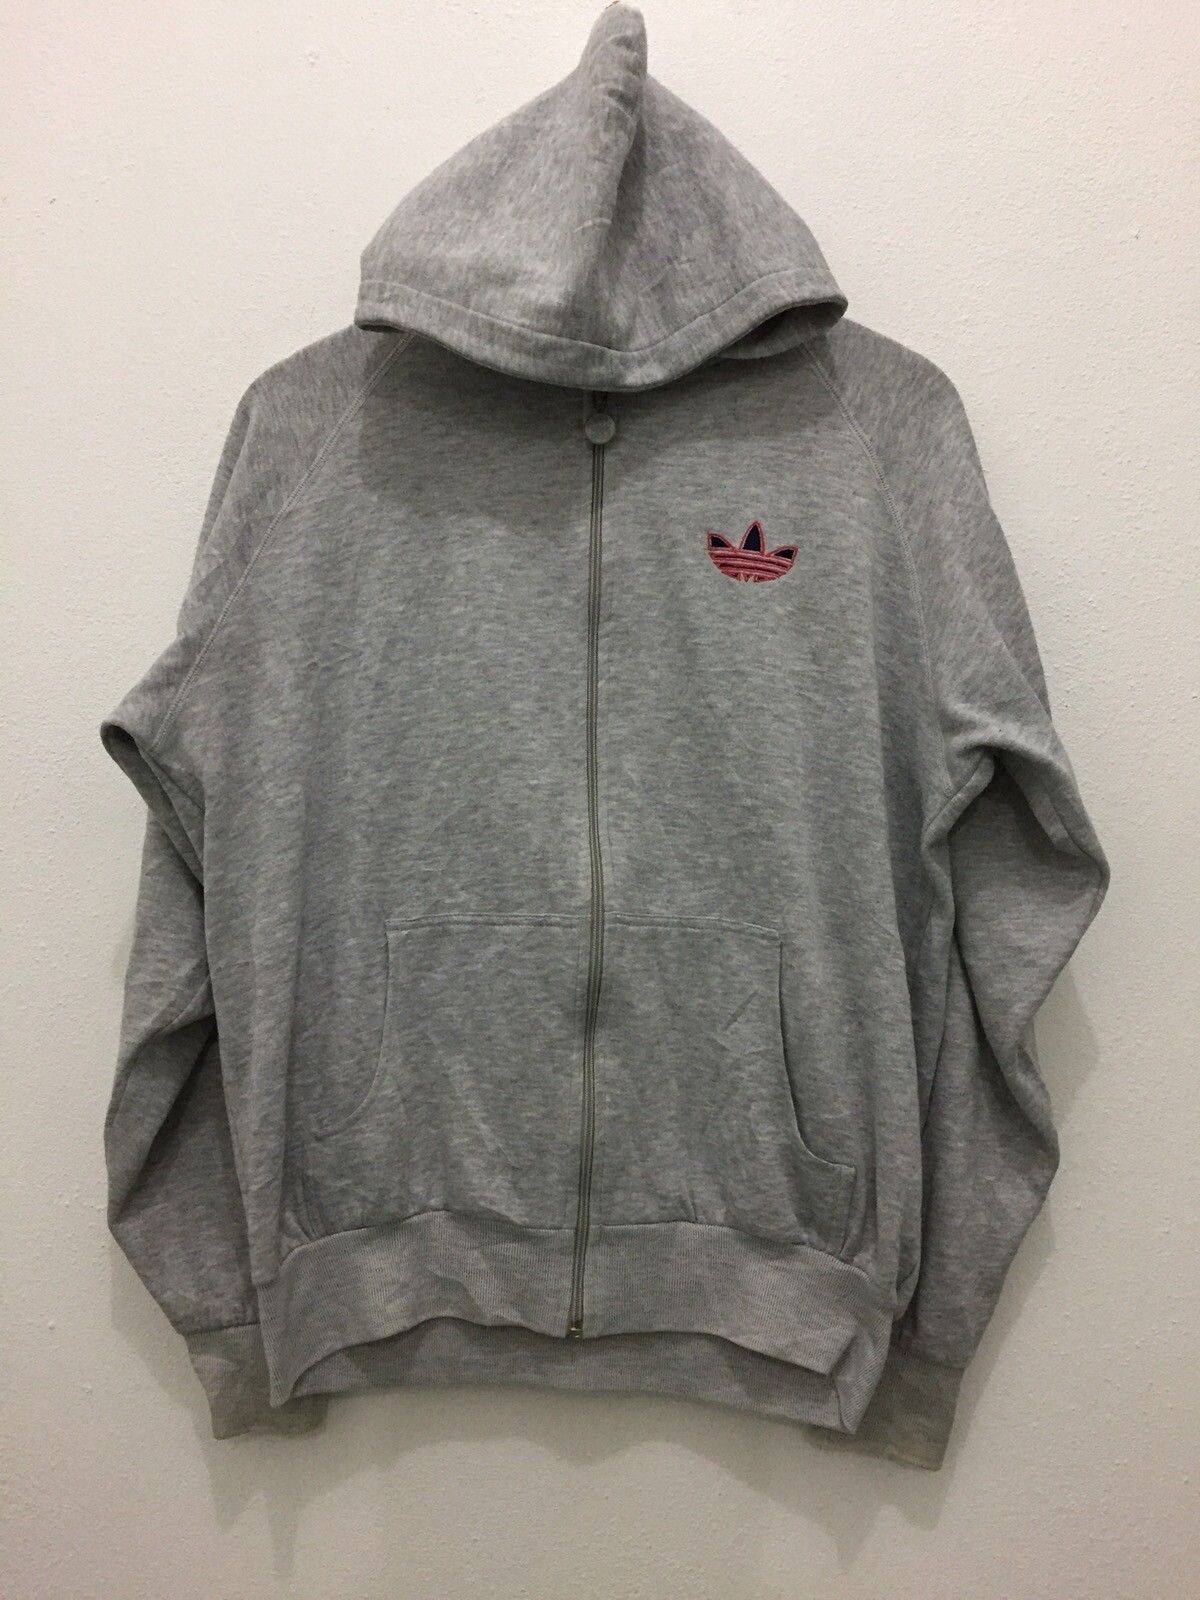 Adidas Adidas Zip Up Hoodie Size US L / EU 52-54 / 3 - 1 Preview